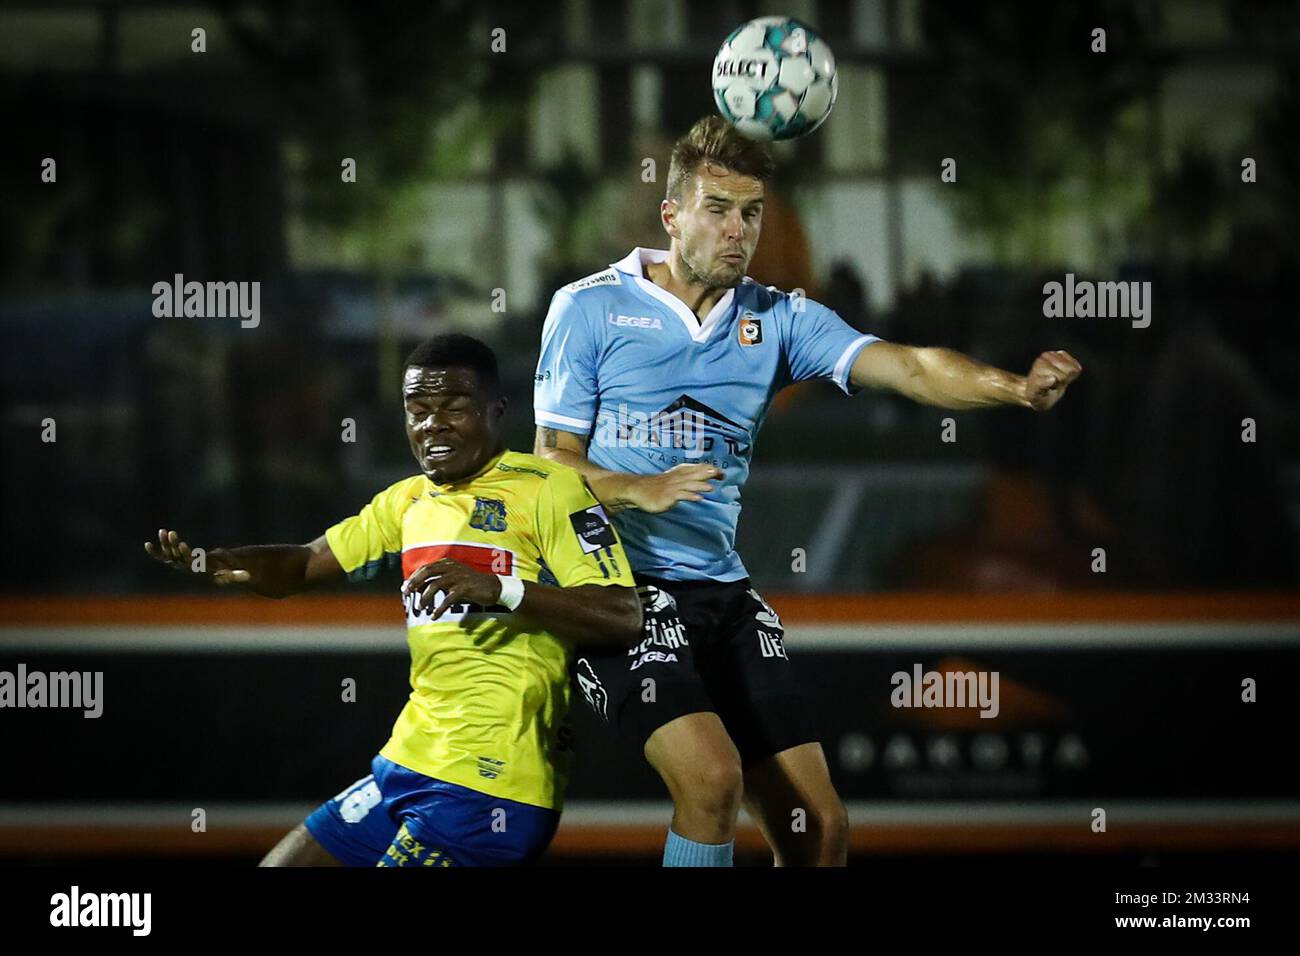 Westerlo's Kouya Mabea and Deinze's Lennart Mertens fights for the ball during a soccer match between KMSK Deinze and Westerlo, Friday 23 October 2020 in Deinze, on day 8 of the 'Proximus League' 1B second division of the Belgian soccer championship. BELGA PHOTO DAVID PINTENS Stock Photo